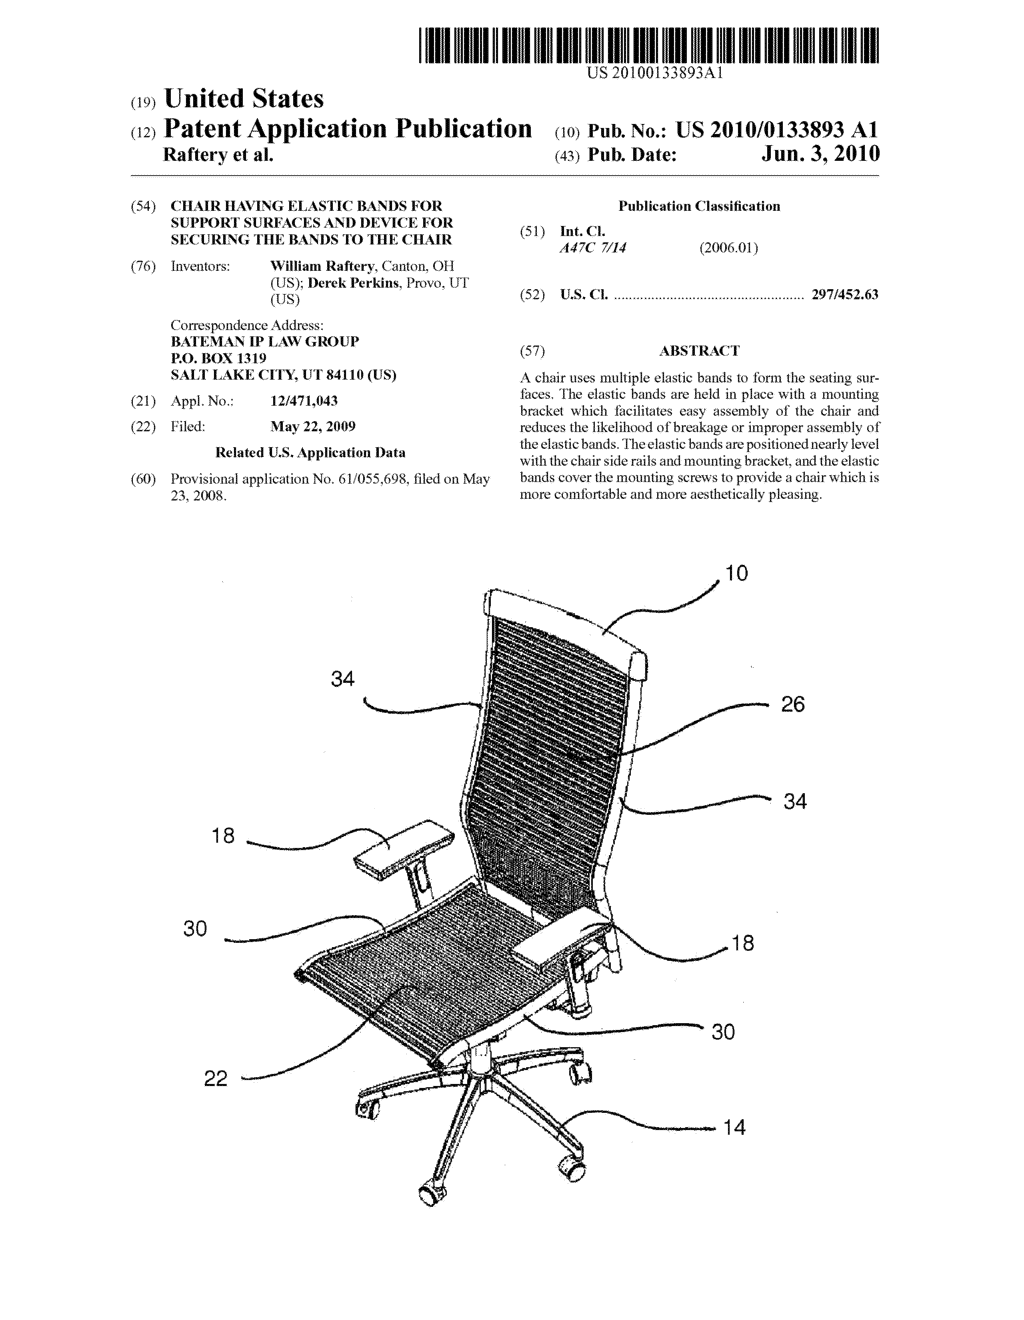 CHAIR HAVING ELASTIC BANDS FOR SUPPORT SURFACES AND DEVICE FOR SECURING THE BANDS TO THE CHAIR - diagram, schematic, and image 01